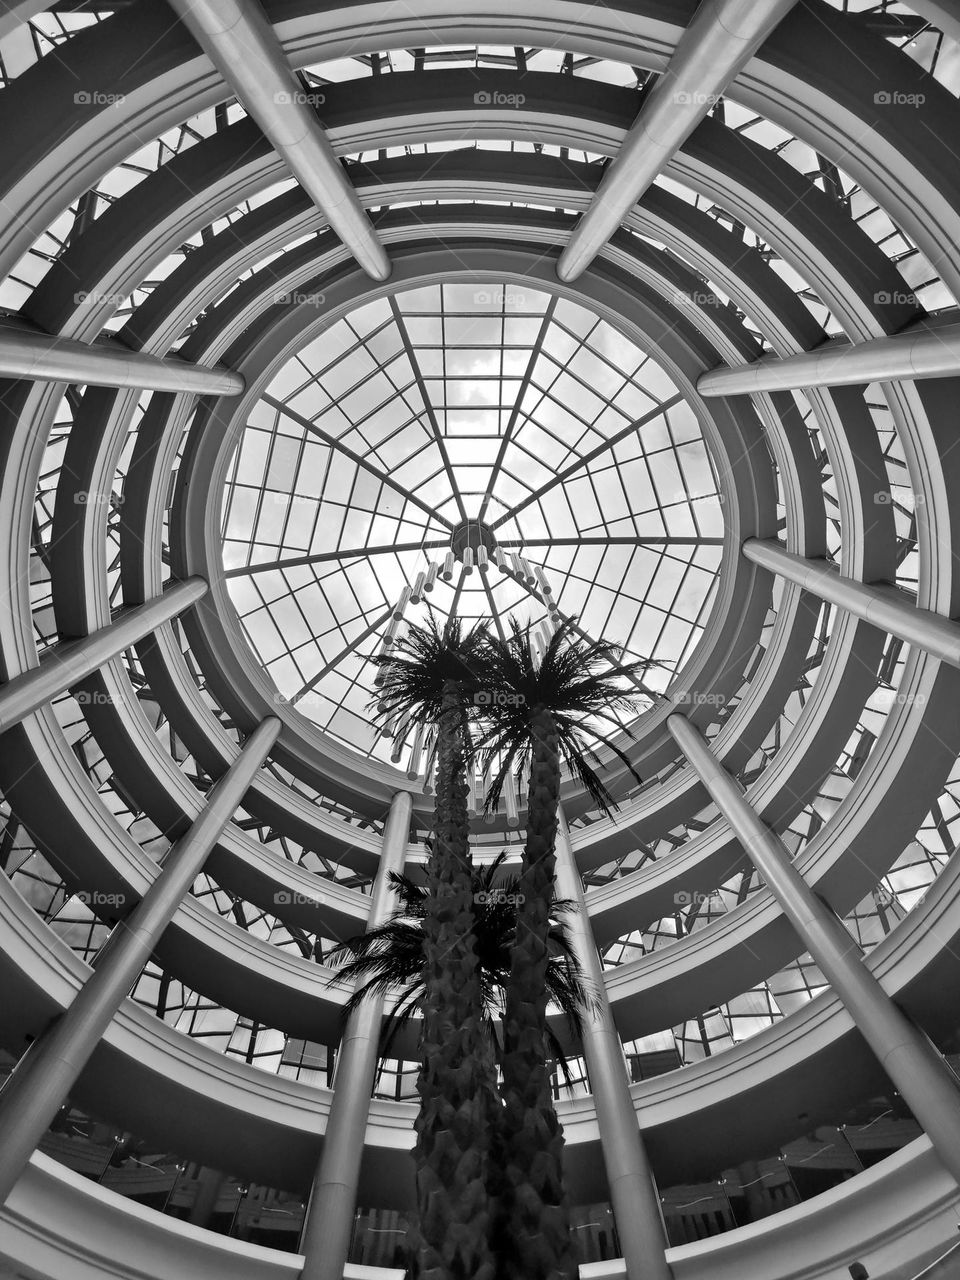 Unique architecture. (Look up.) 
Black and white photography.